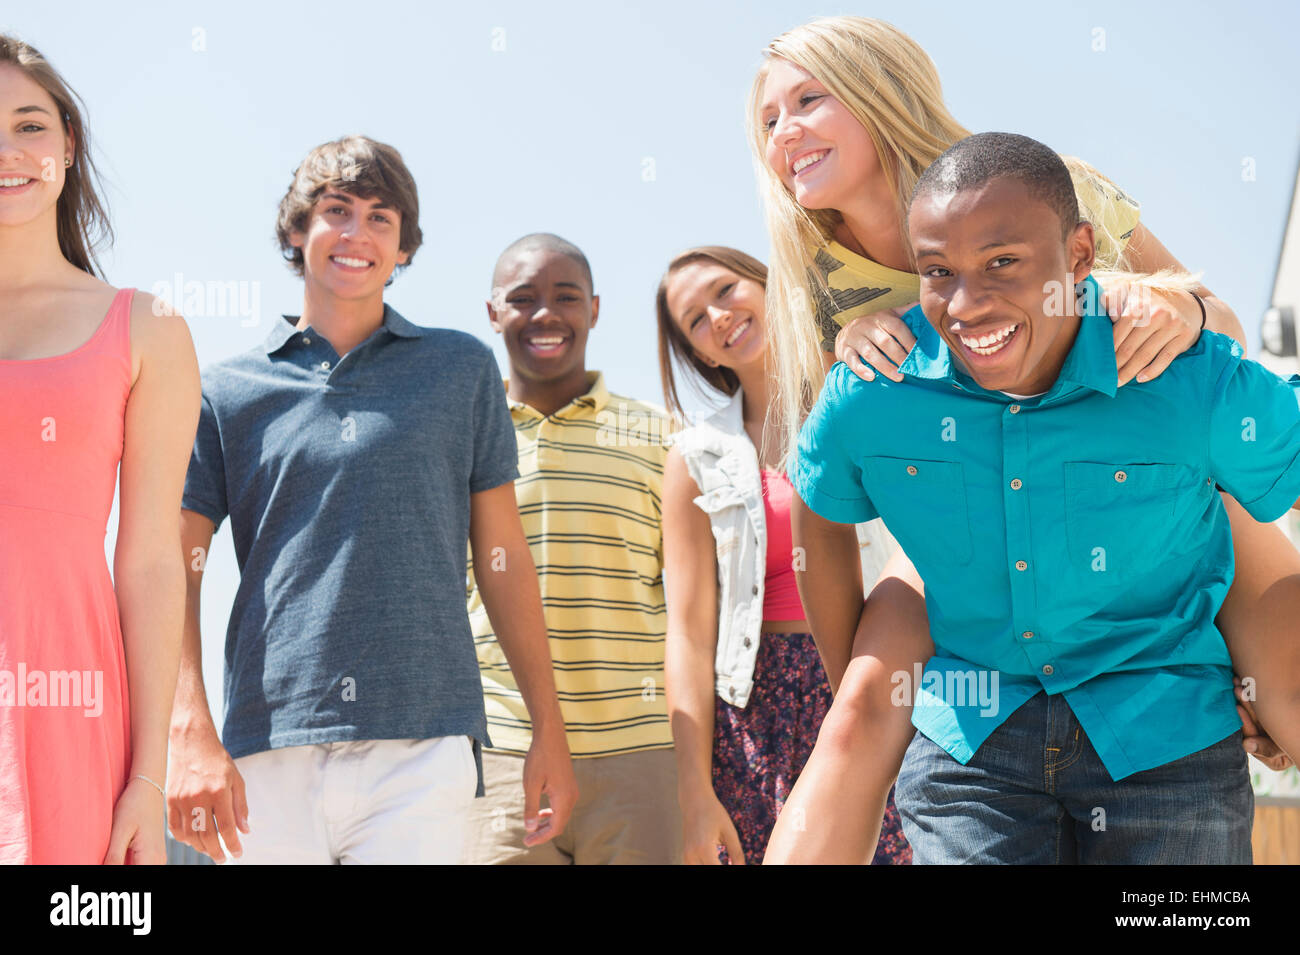 Teenagers standing together outdoors Stock Photo